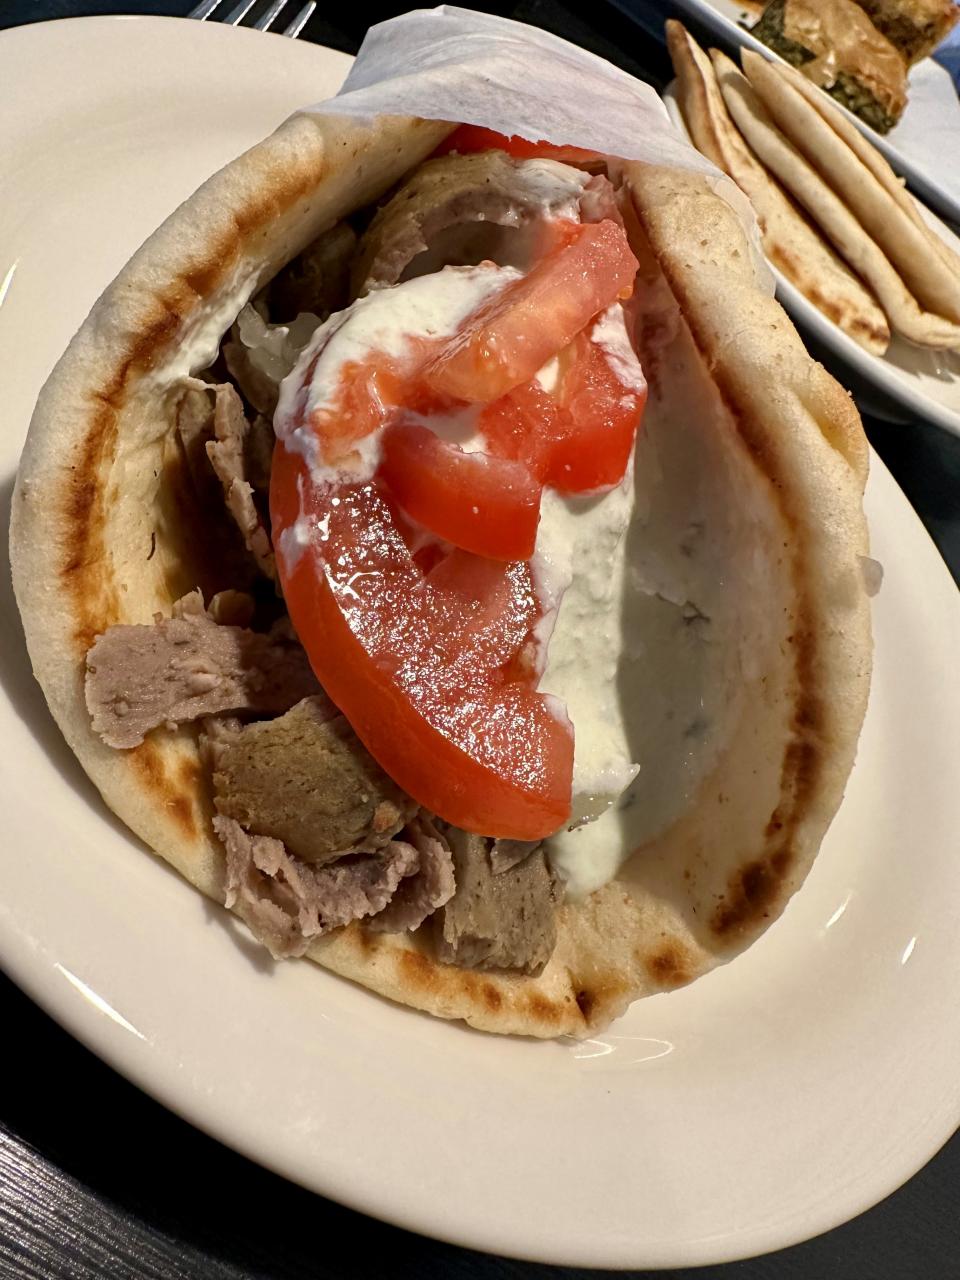 The gyro at Niki’s Rainbow Restaurant & Bar in Satellite Beach was glorious: so fat with slices of seasoned meat, tomato and onions dressed with tzatziki that you had to give up, put it down and use knife and fork.